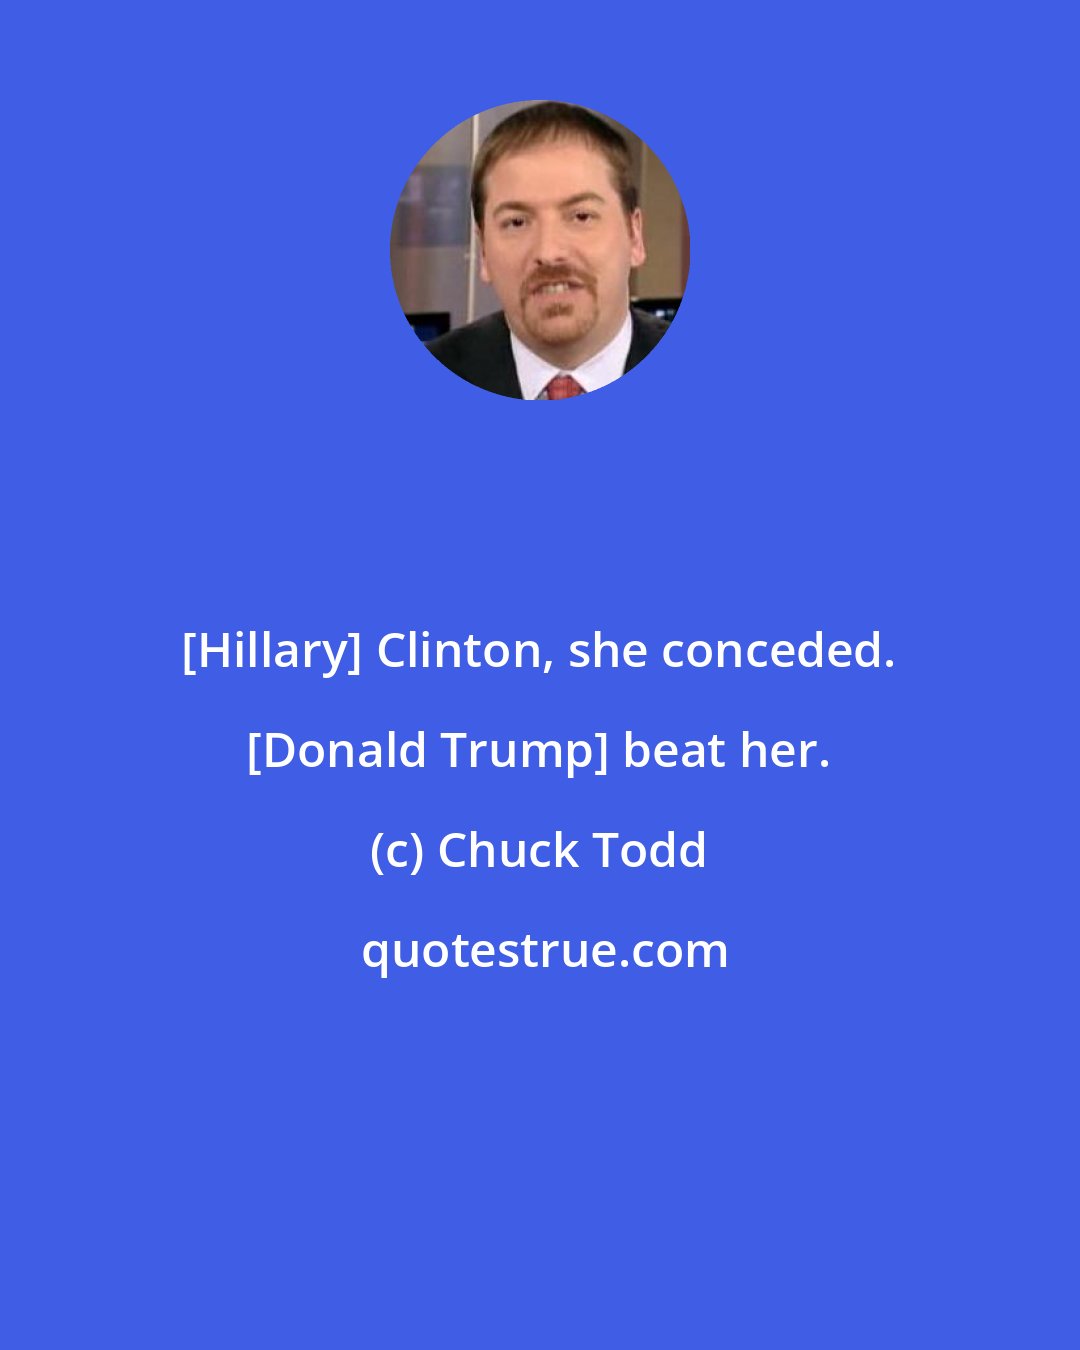 Chuck Todd: [Hillary] Clinton, she conceded. [Donald Trump] beat her.